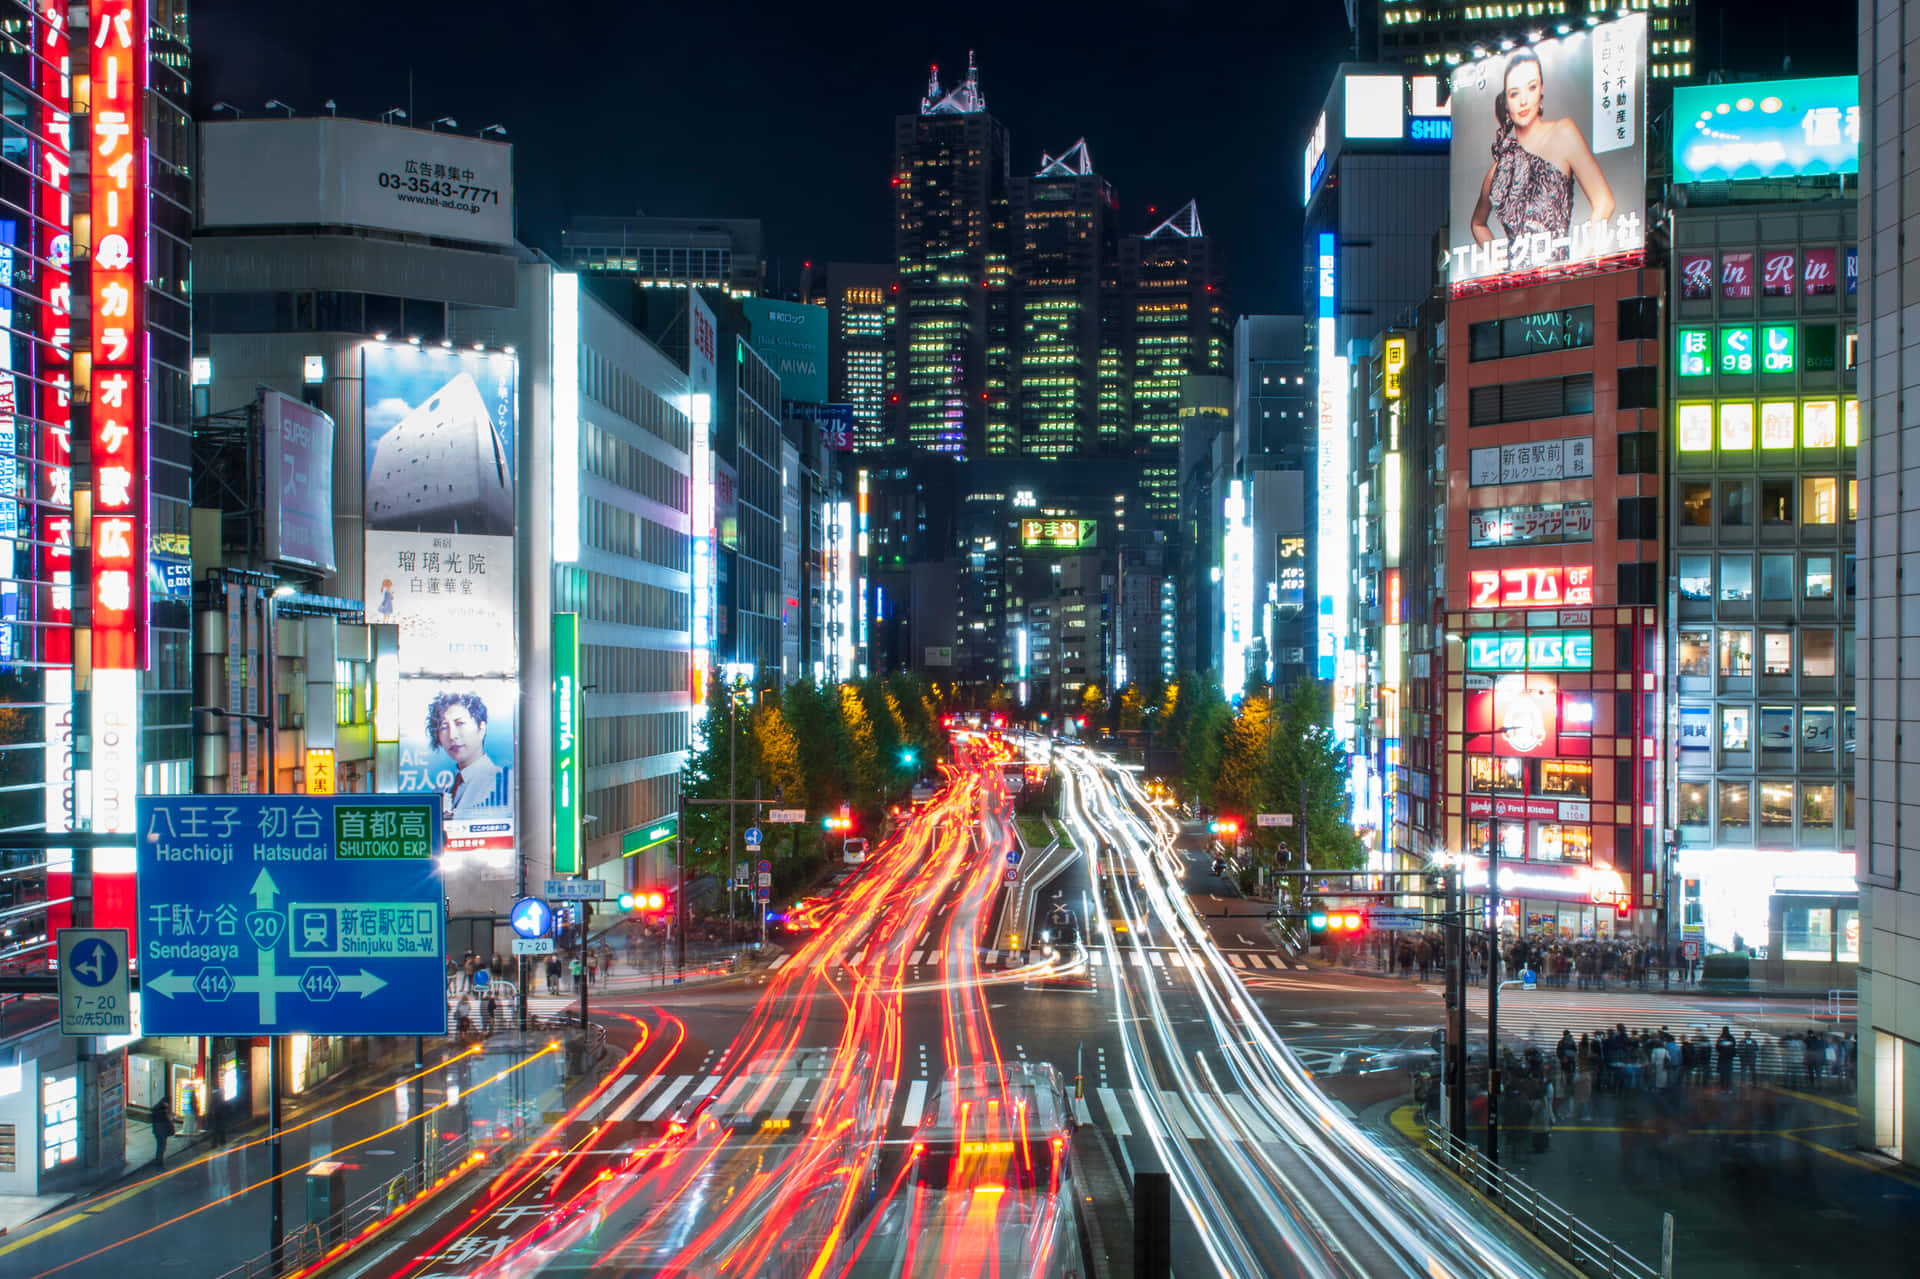 Get lost in the Beauty of Tokyo at Night